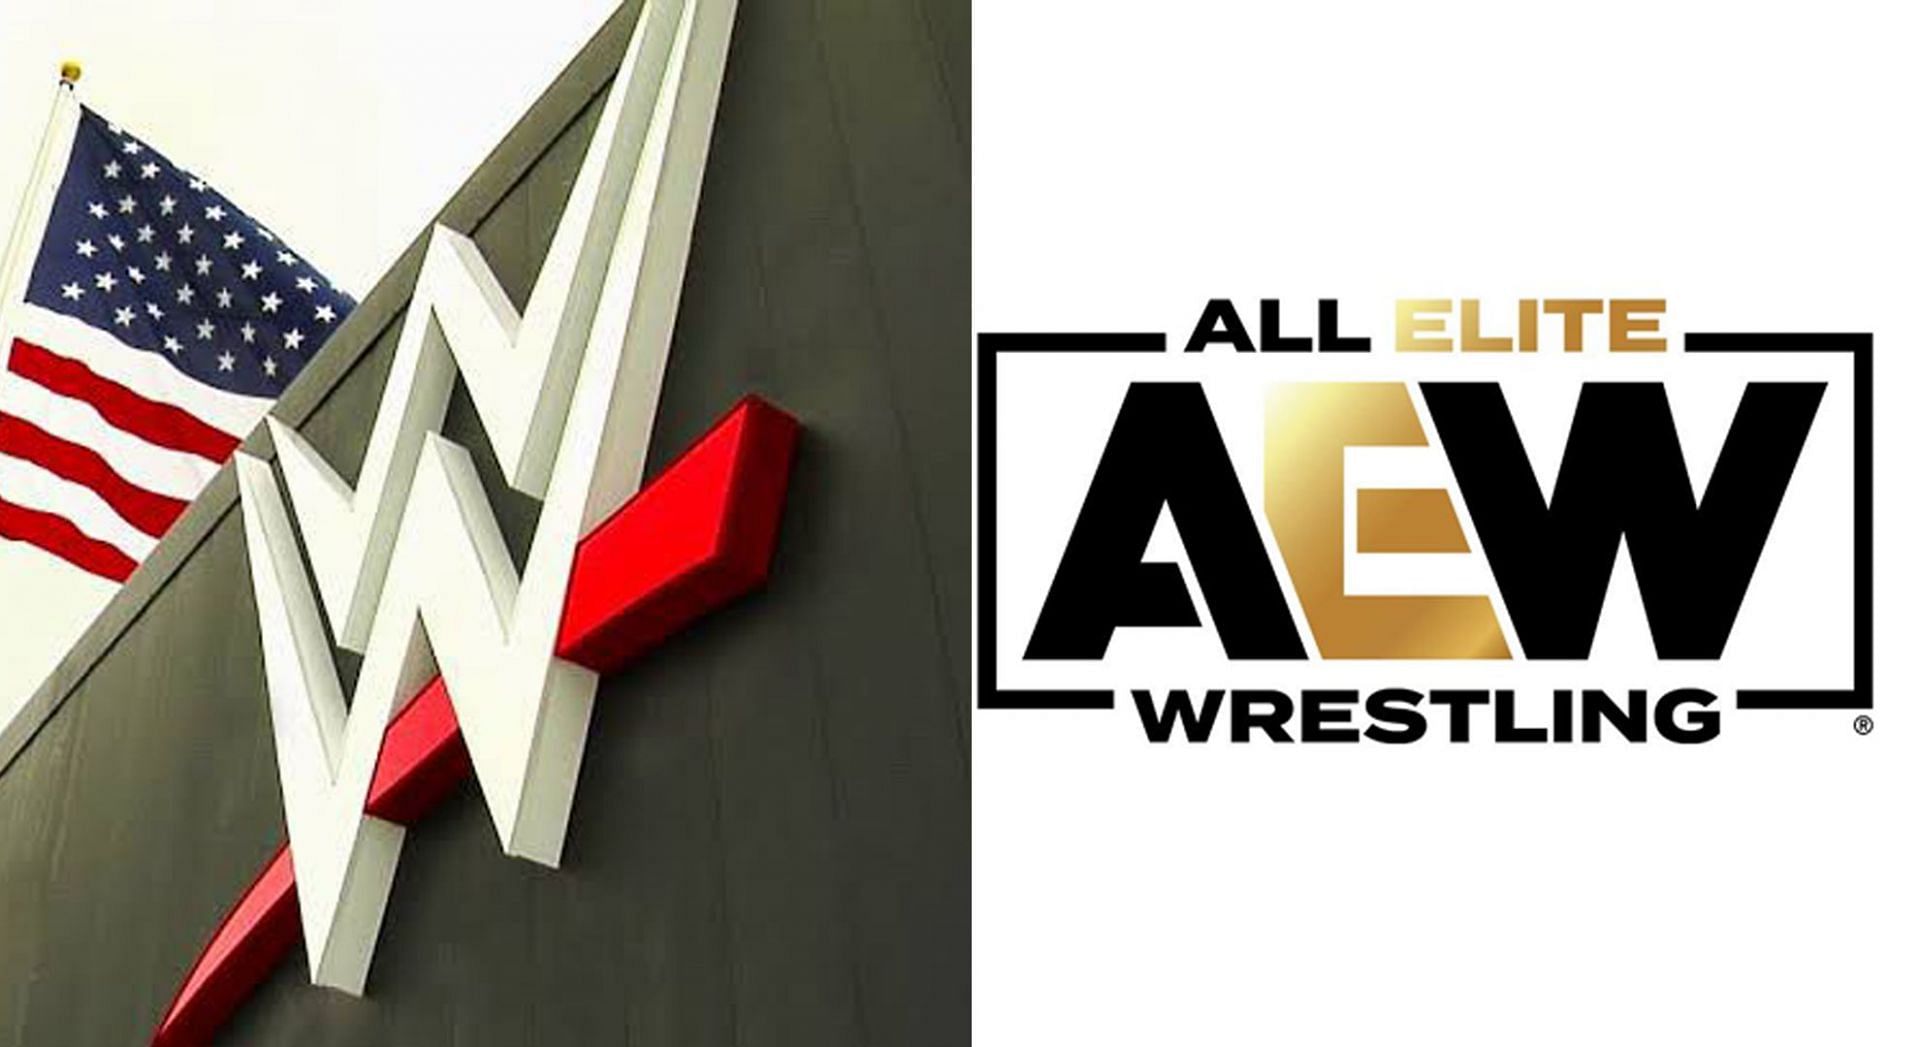 WWE and AEW are two of the biggest promotions in the world